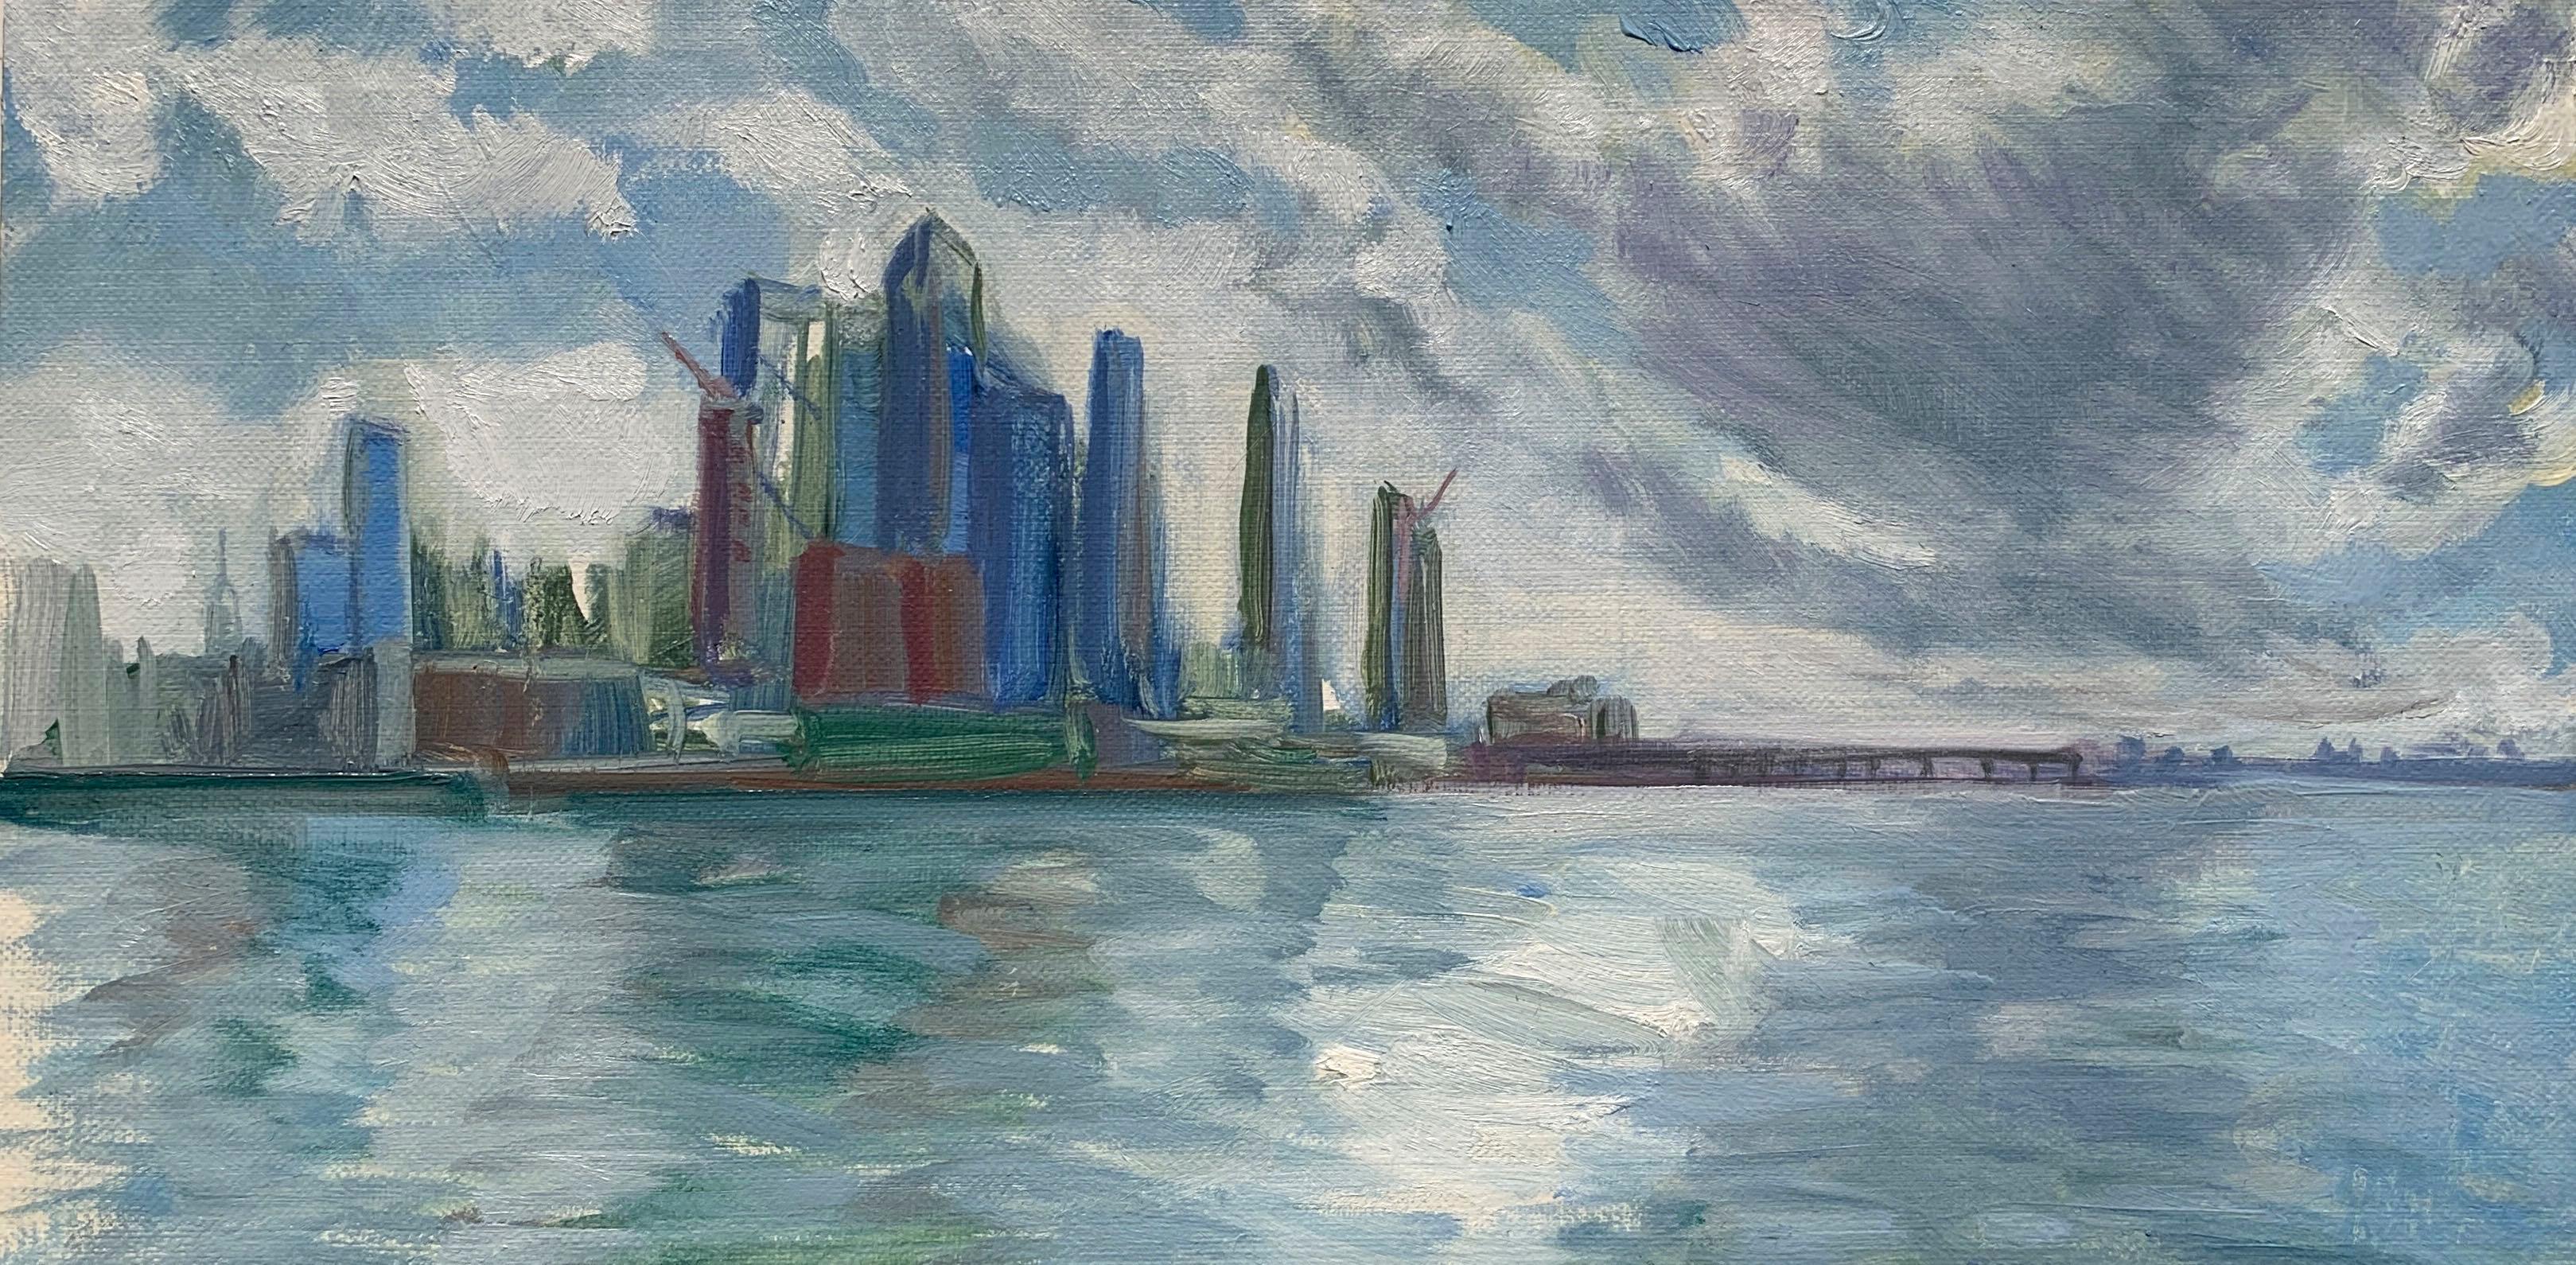 Gwyneth Leech Landscape Painting - Crossing the Water: View of the Hudson Yards, Impressionist skyline painting